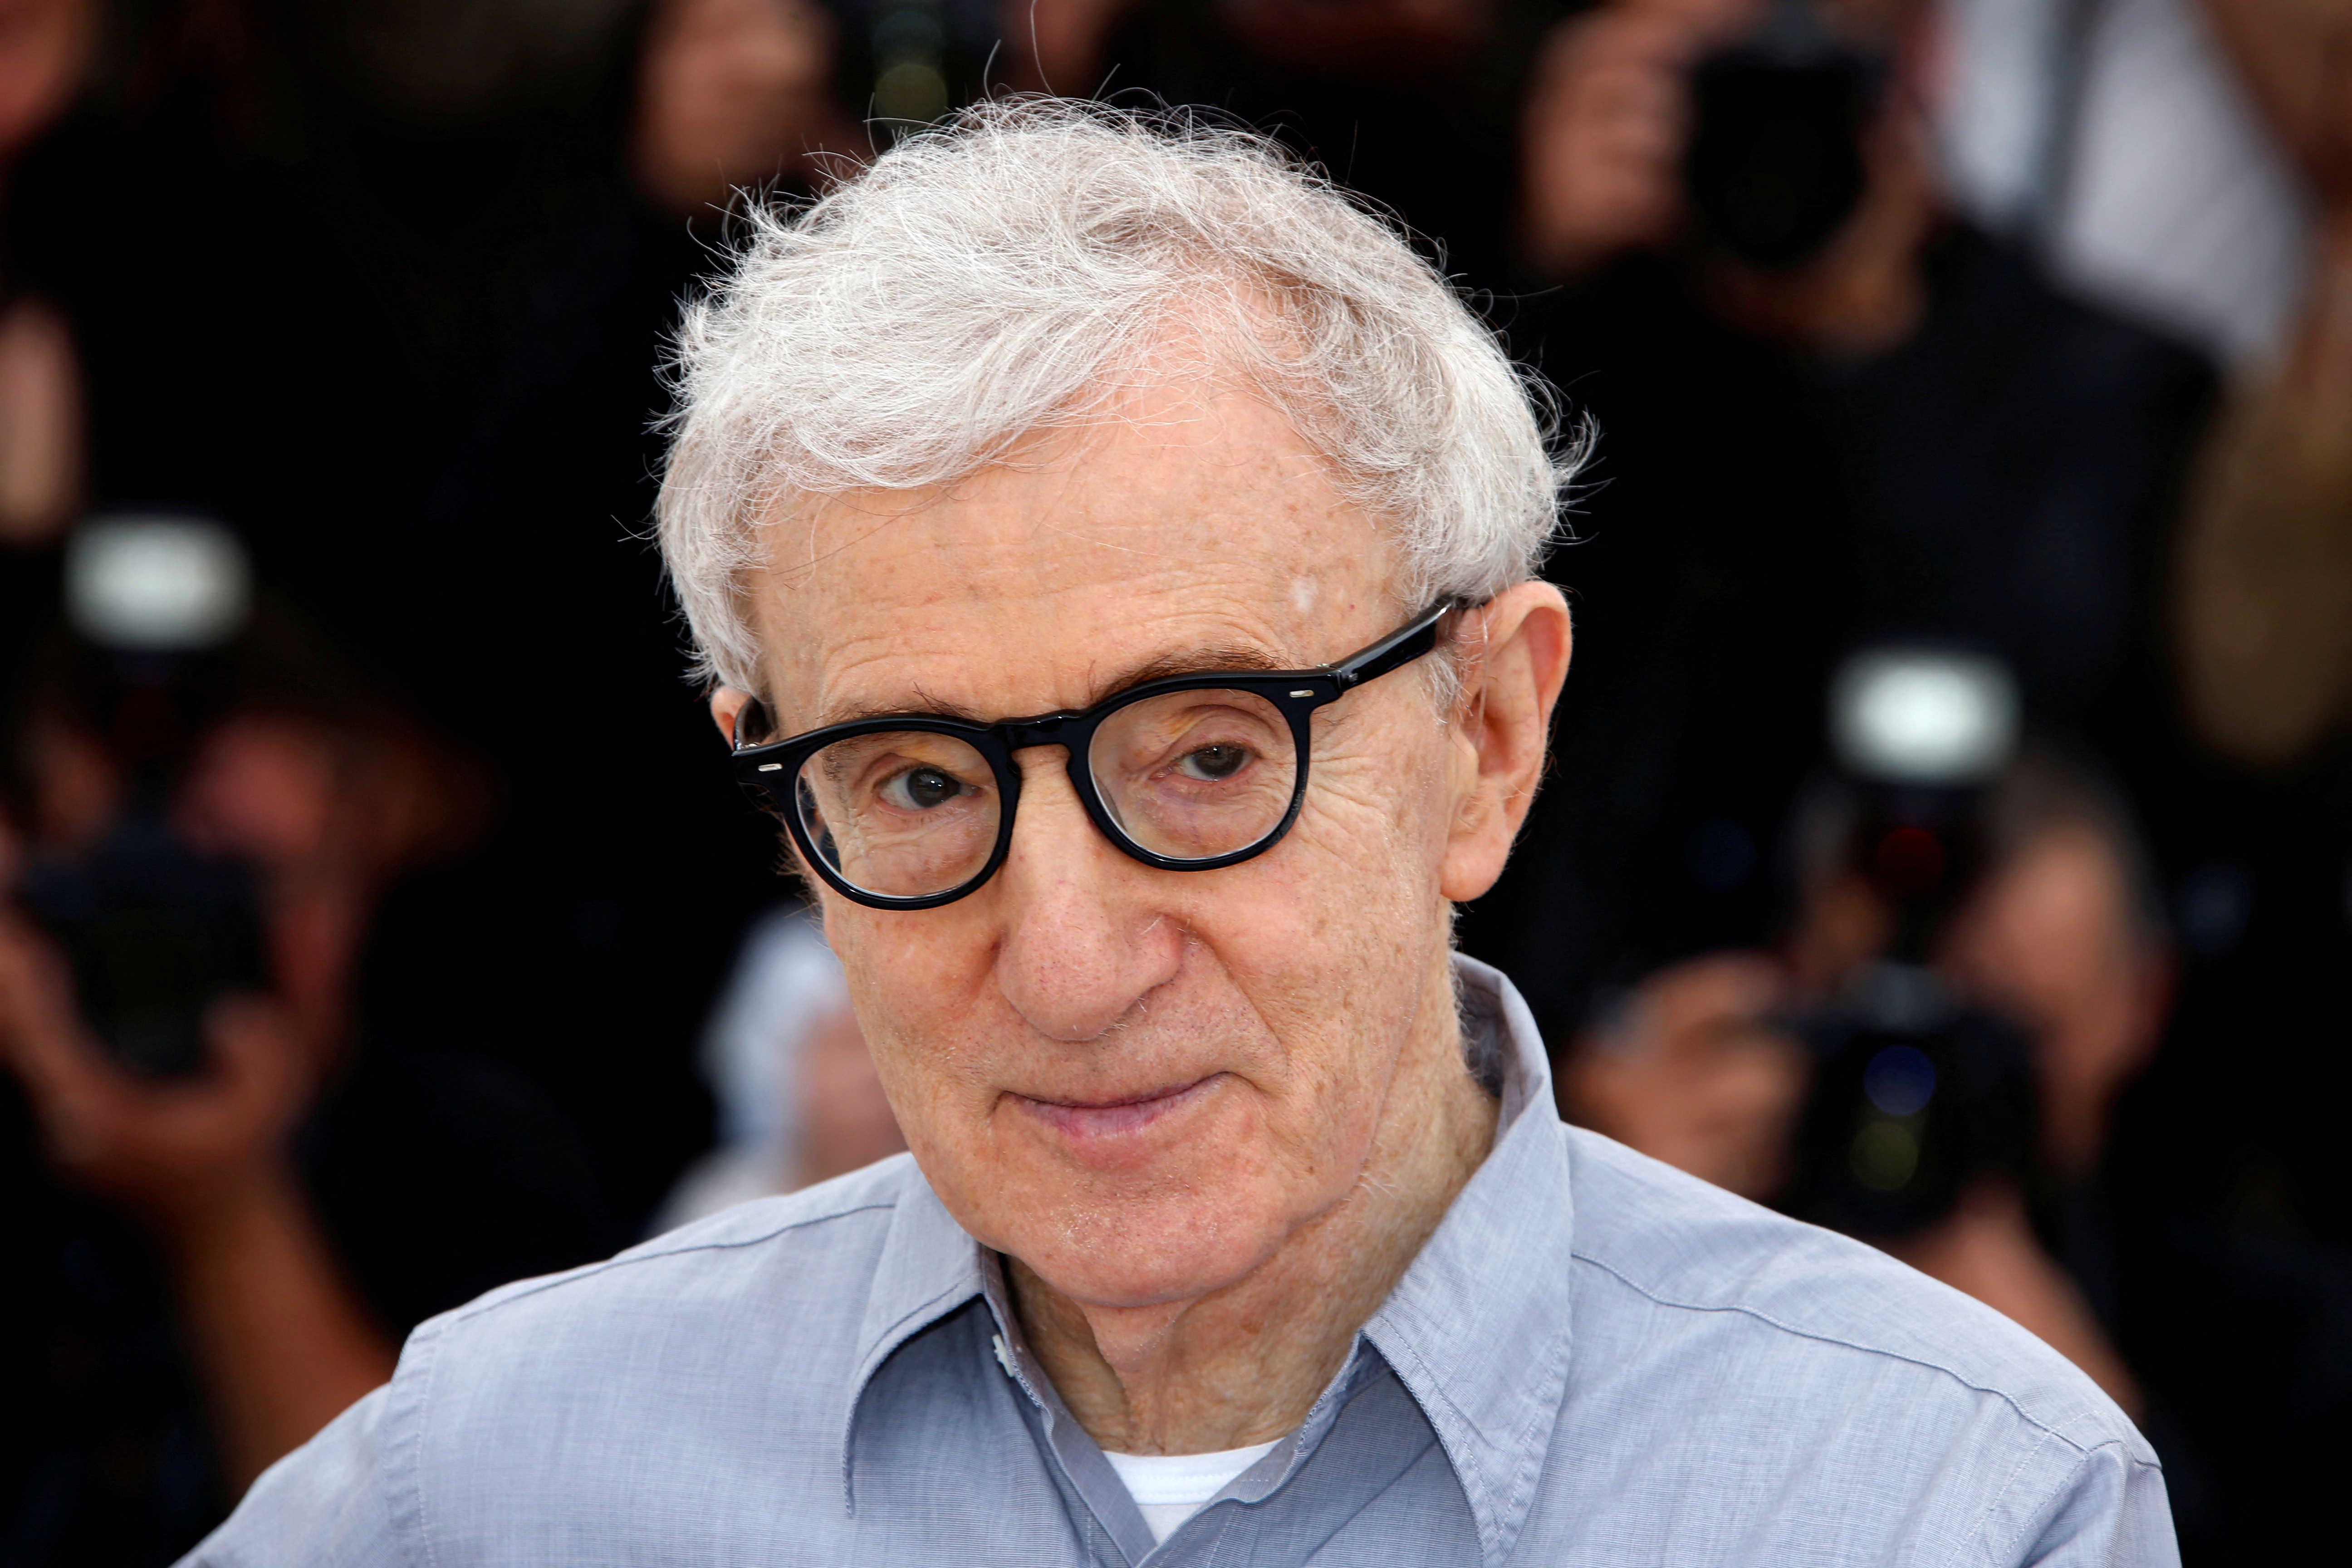 Woody Allen, in interview, says he may stop directing movies